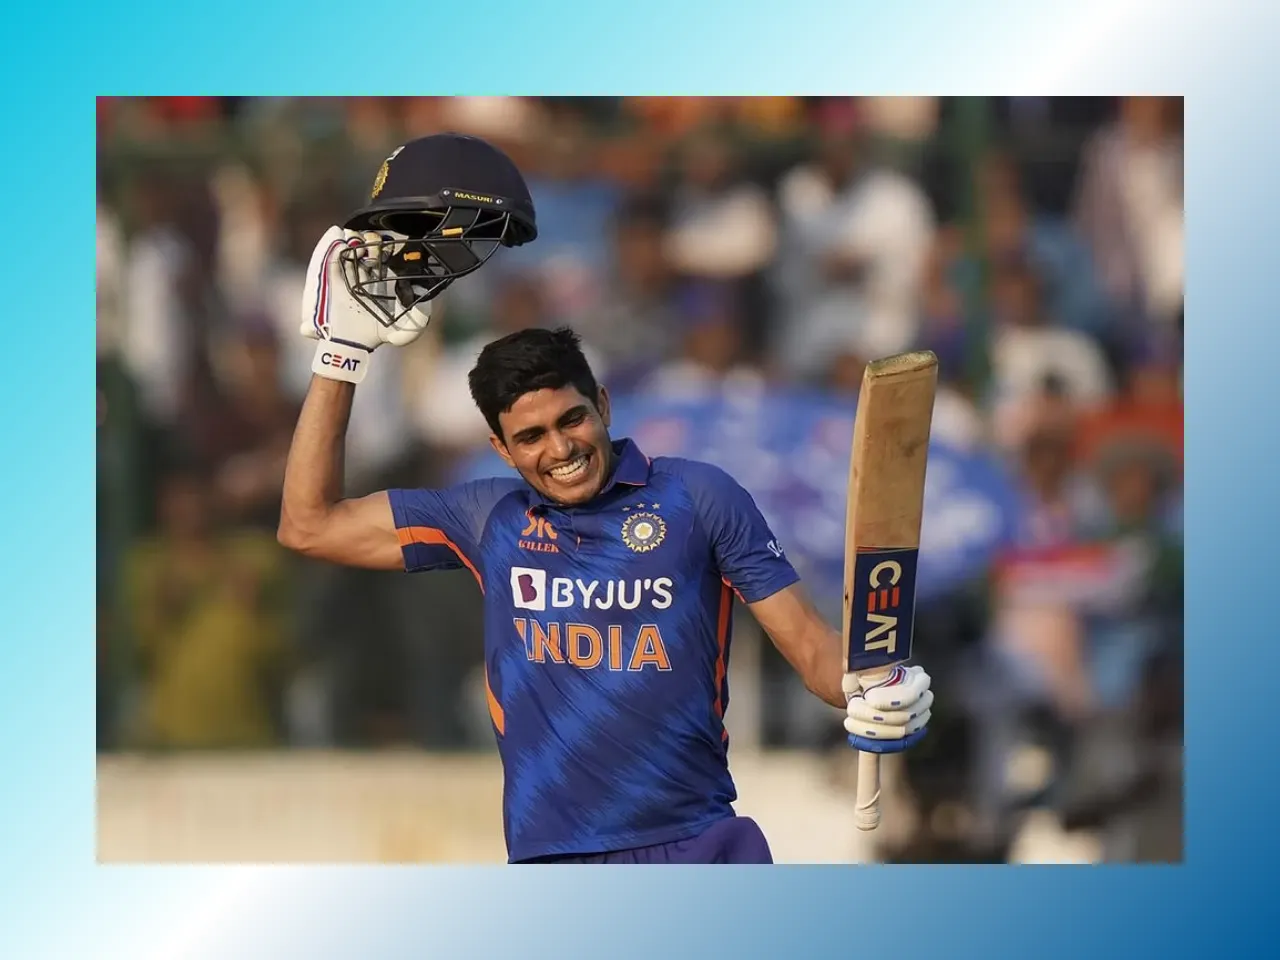 Experts bat for Shubman Gill this World Cup, expect a jump in brand value